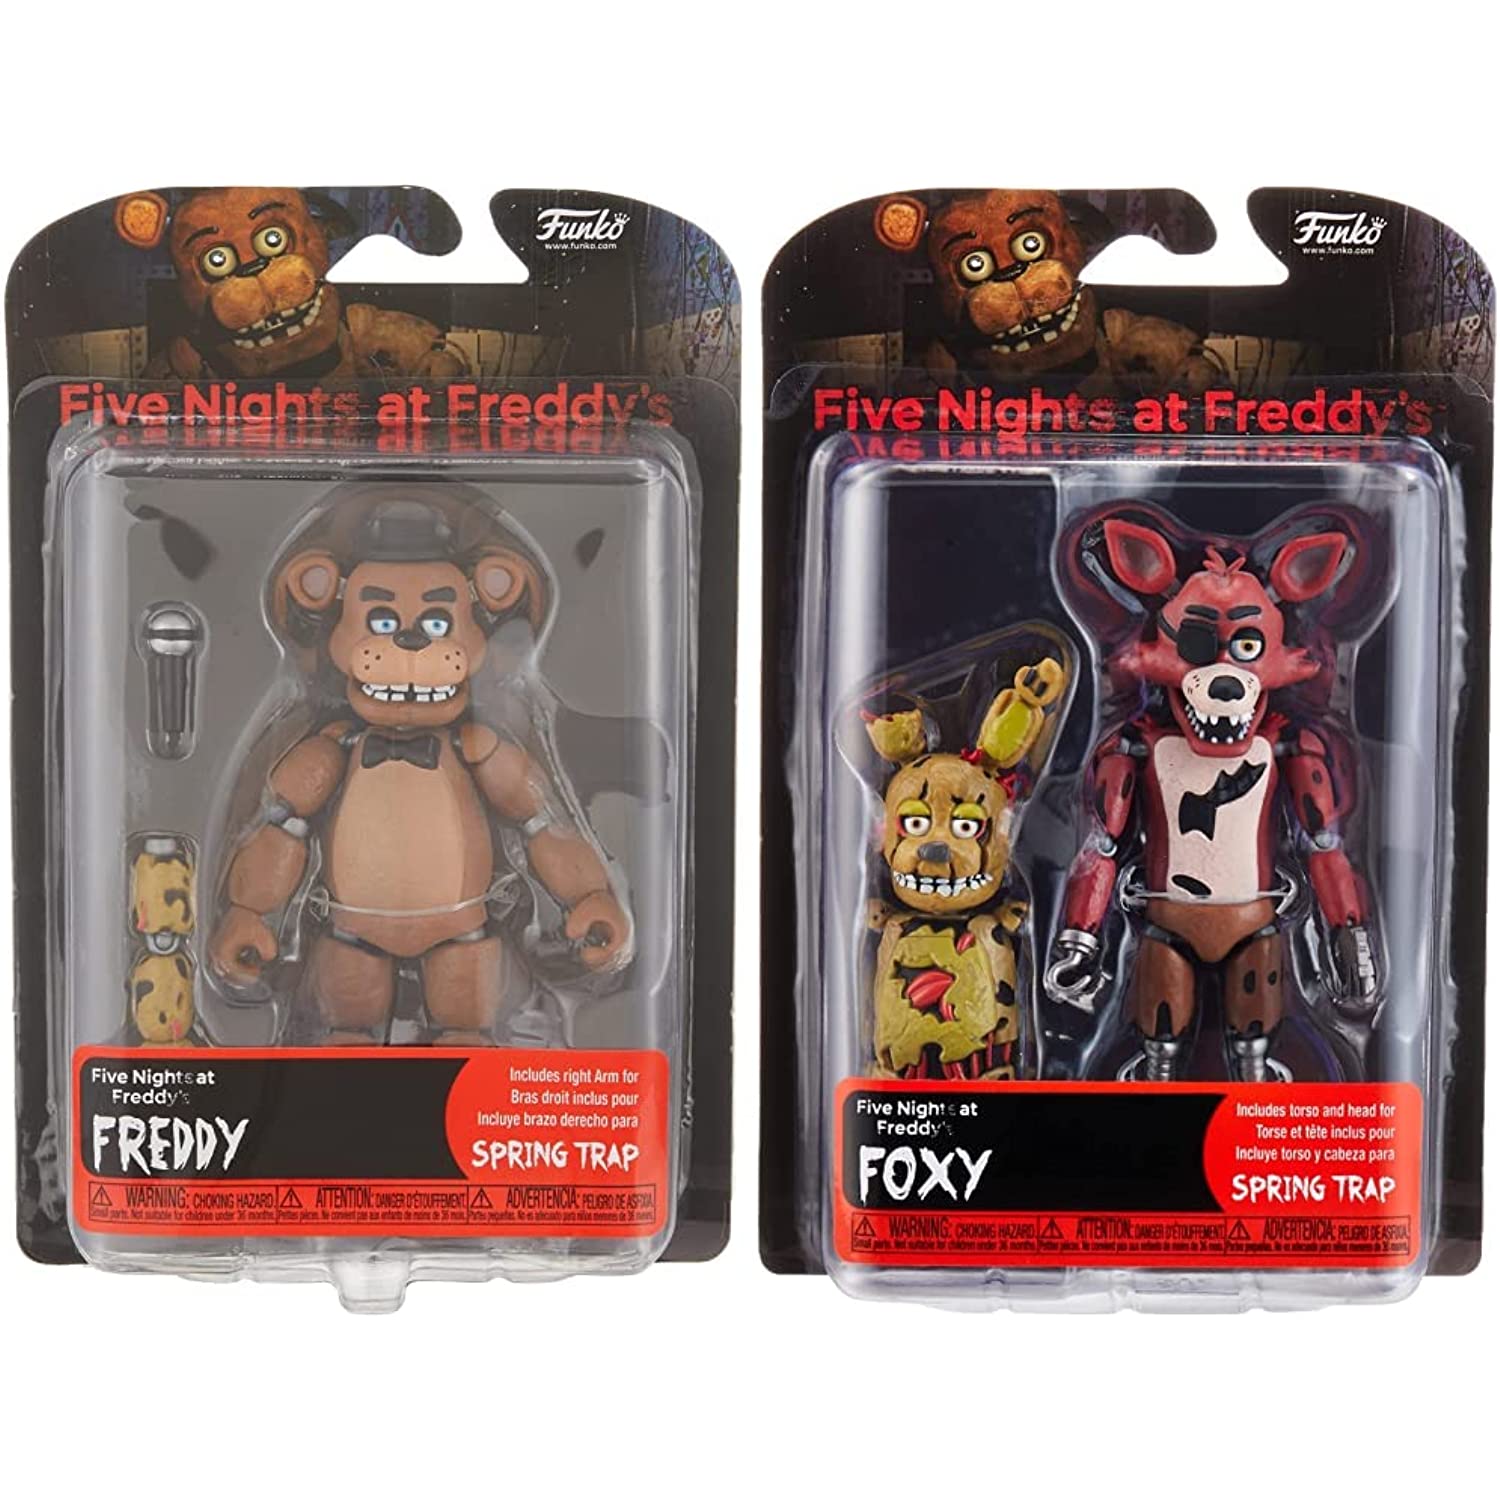 Funko Five Nights at Freddy's Articulated Foxy Action Figure, 5